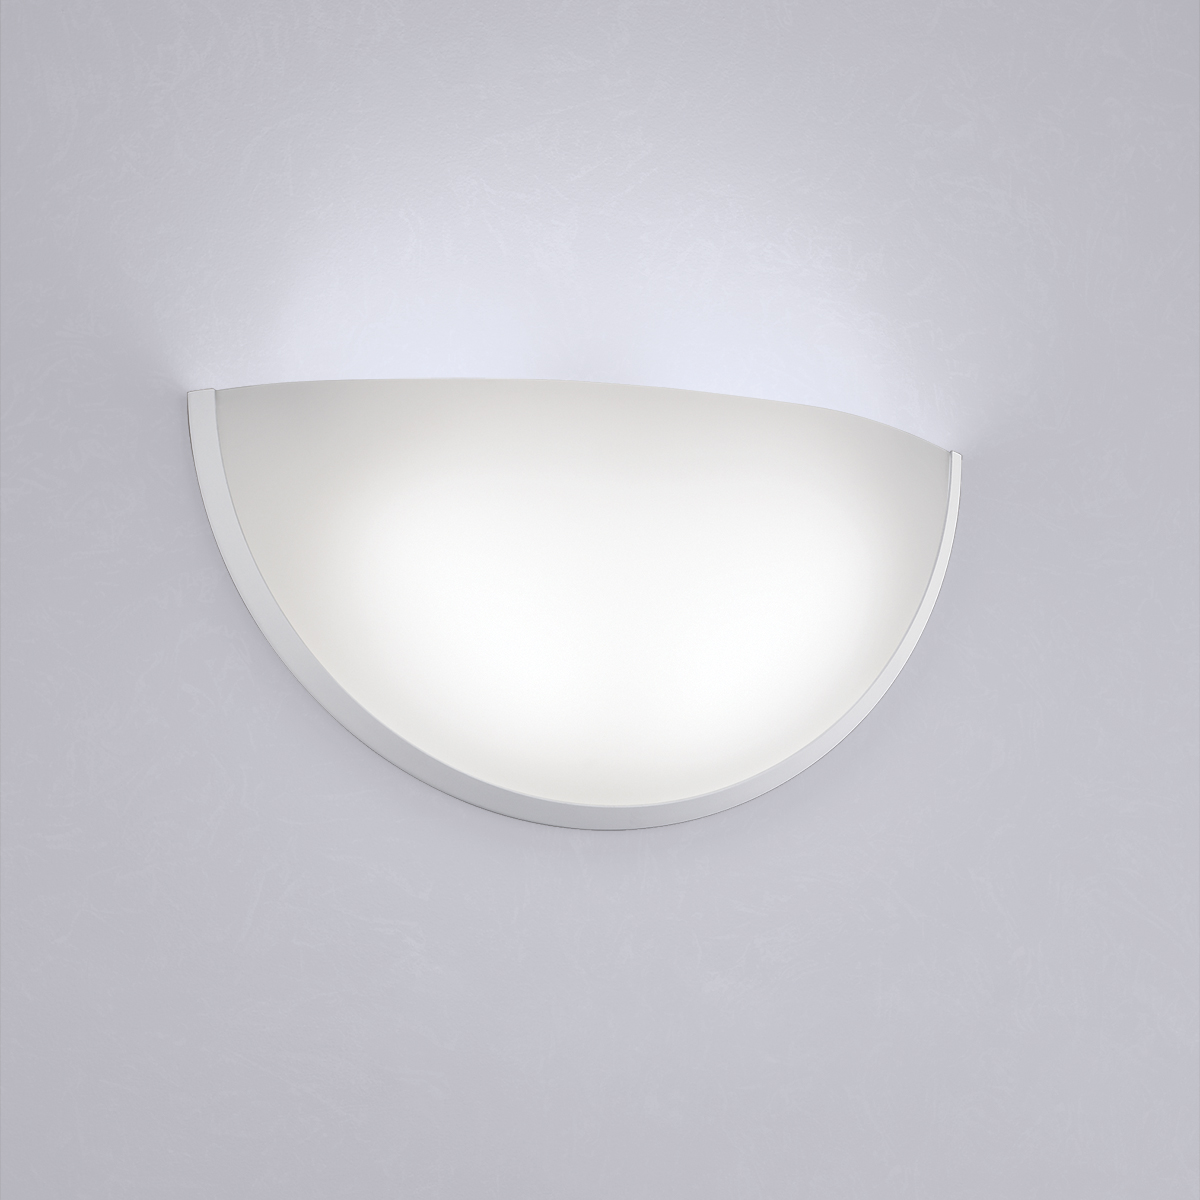 A clean, luminous quarter sphere wall sconce with minimal trim